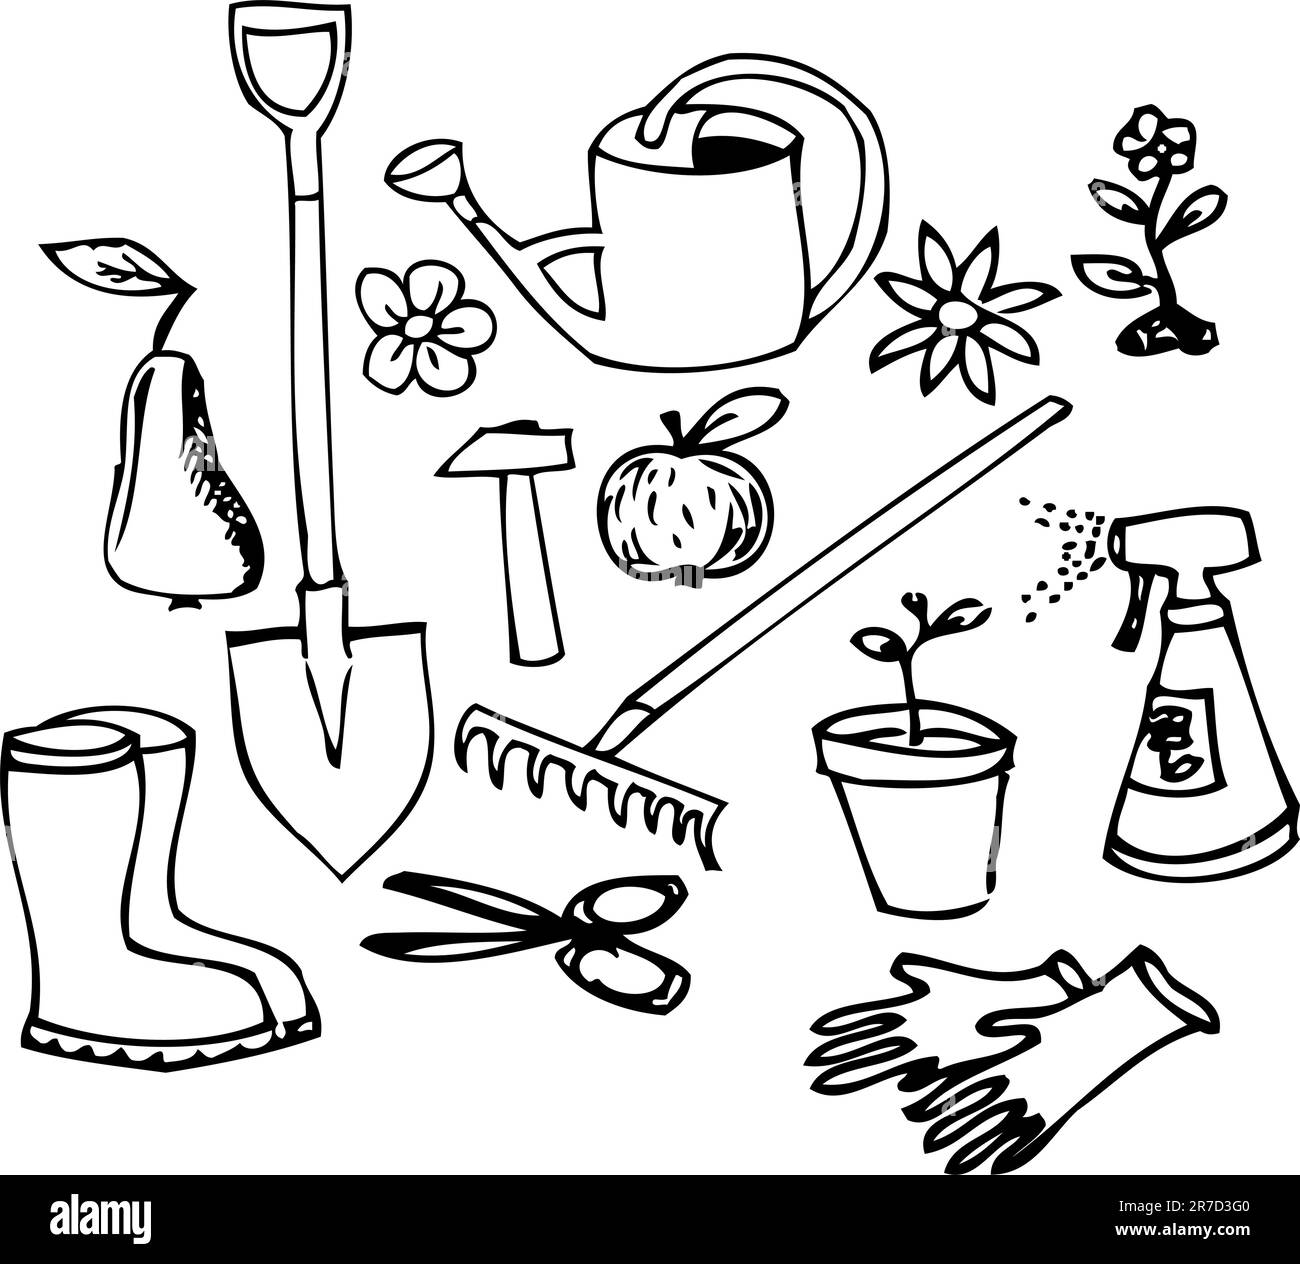 Garden doodle illustration collection - black on white Stock Vector